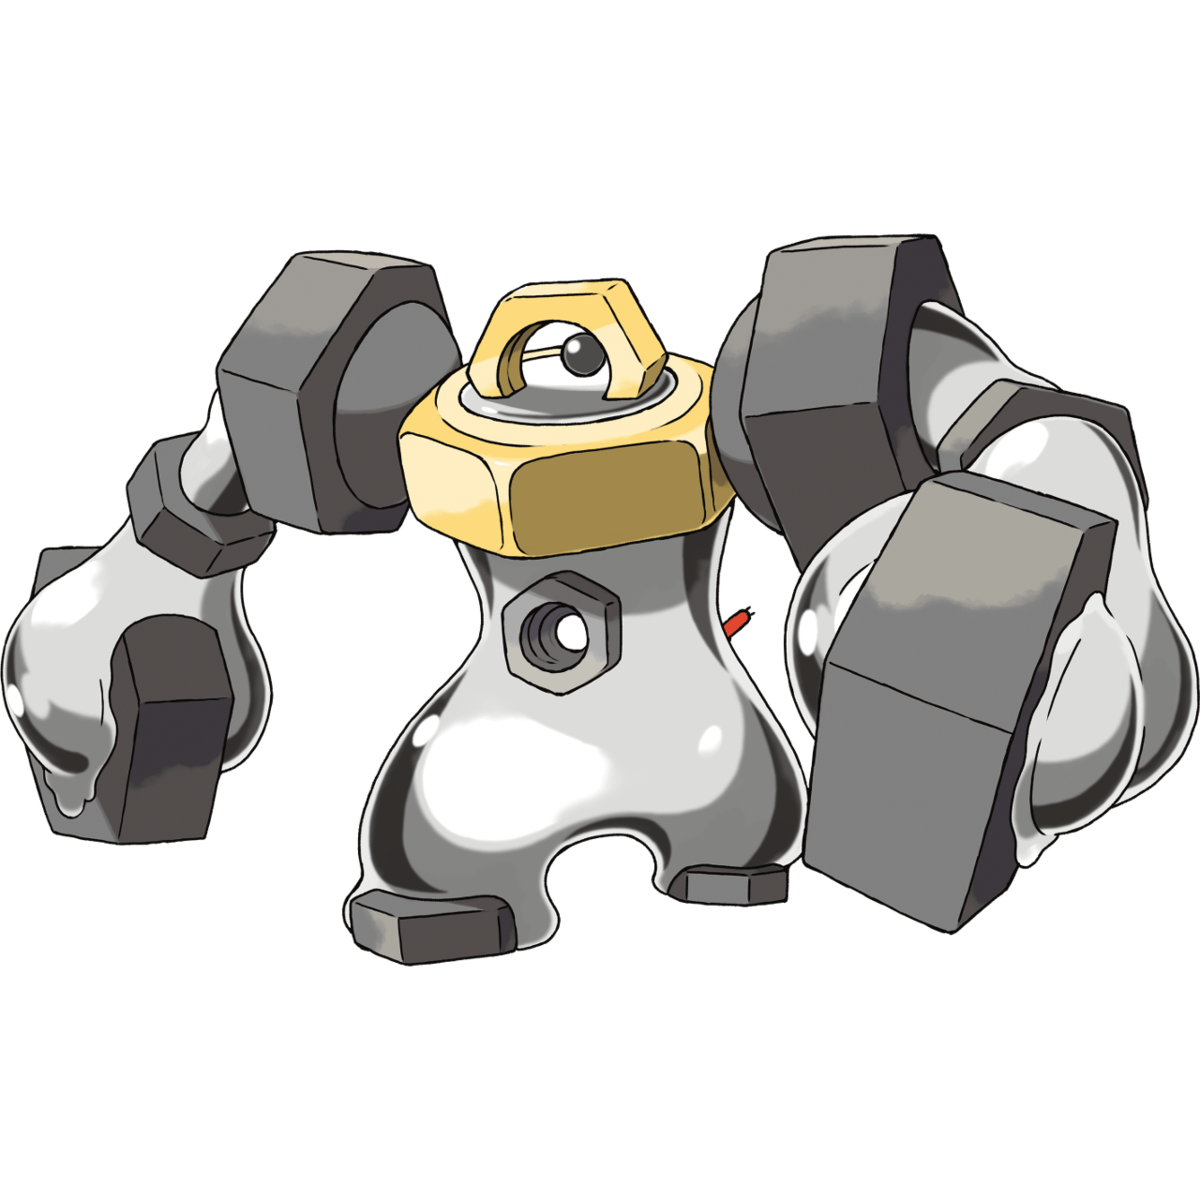 Melmetal, the best competitive Pokemon in Let's Go Pikachu/Eevee